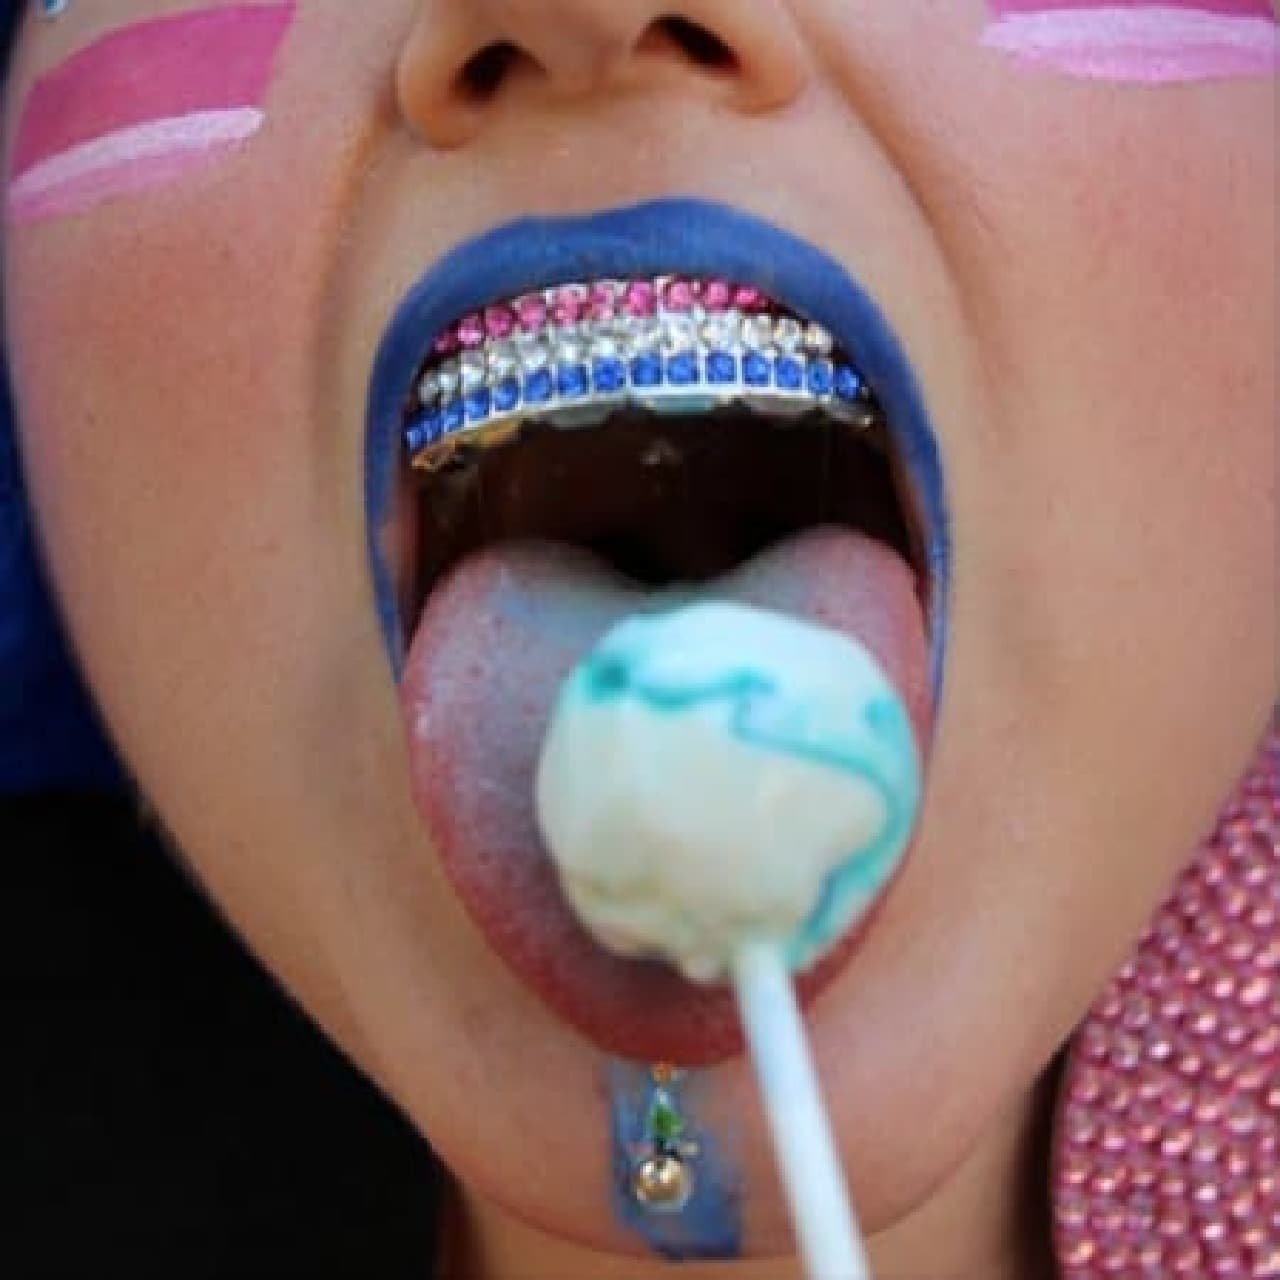 Photos that focus on teeth rather than lollipops